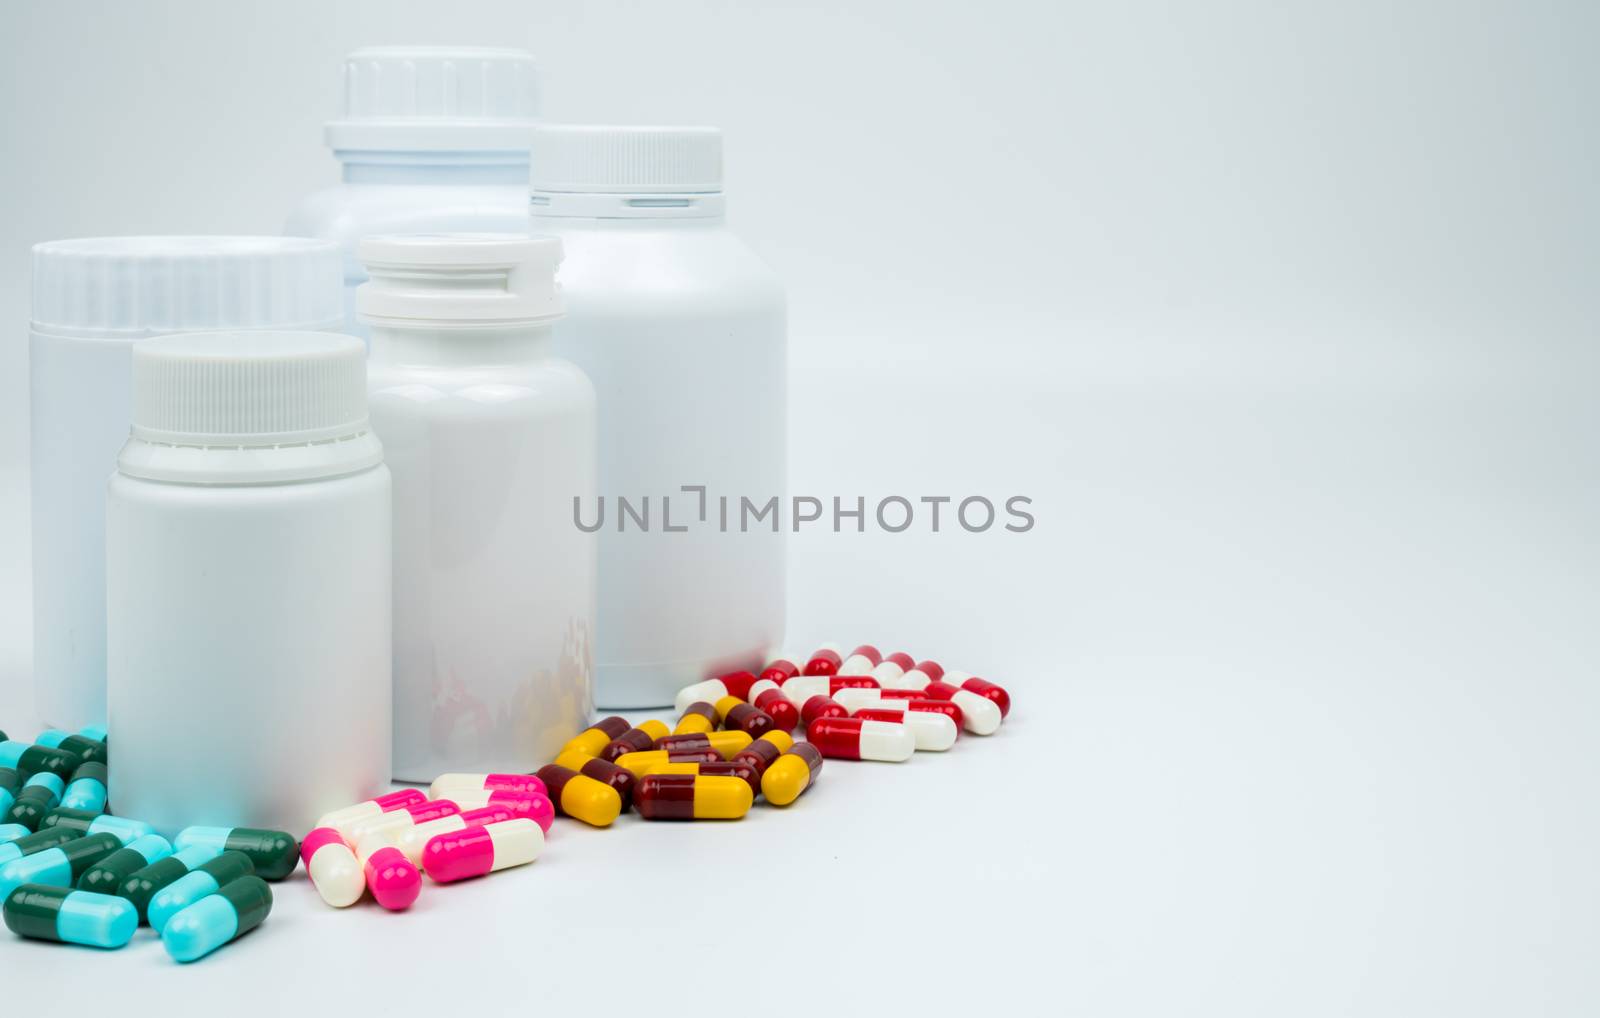 Antibiotic capsules pills and plastic bottle with blank label isolated on white background with copy space. Drug resistance concept. Antibiotics drug use with reasonable and global healthcare concept. Pharmaceutical industry. Pharmacy background. Health budgets and policy concept. by Fahroni